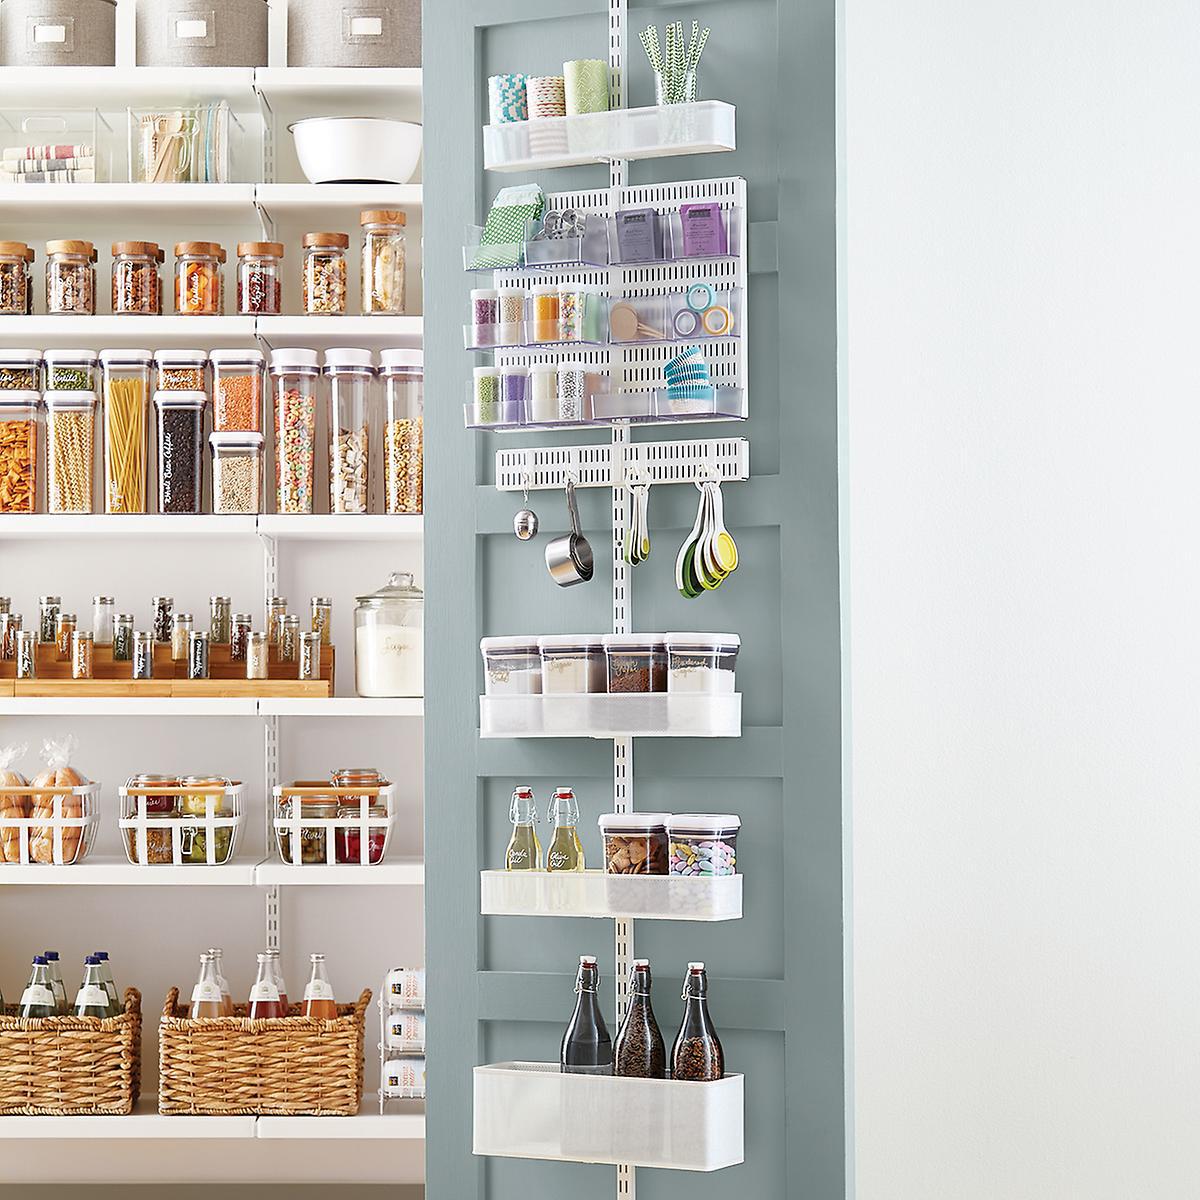 goop - The Pantry Detox: A Brilliant, Clutter-Free Organizational